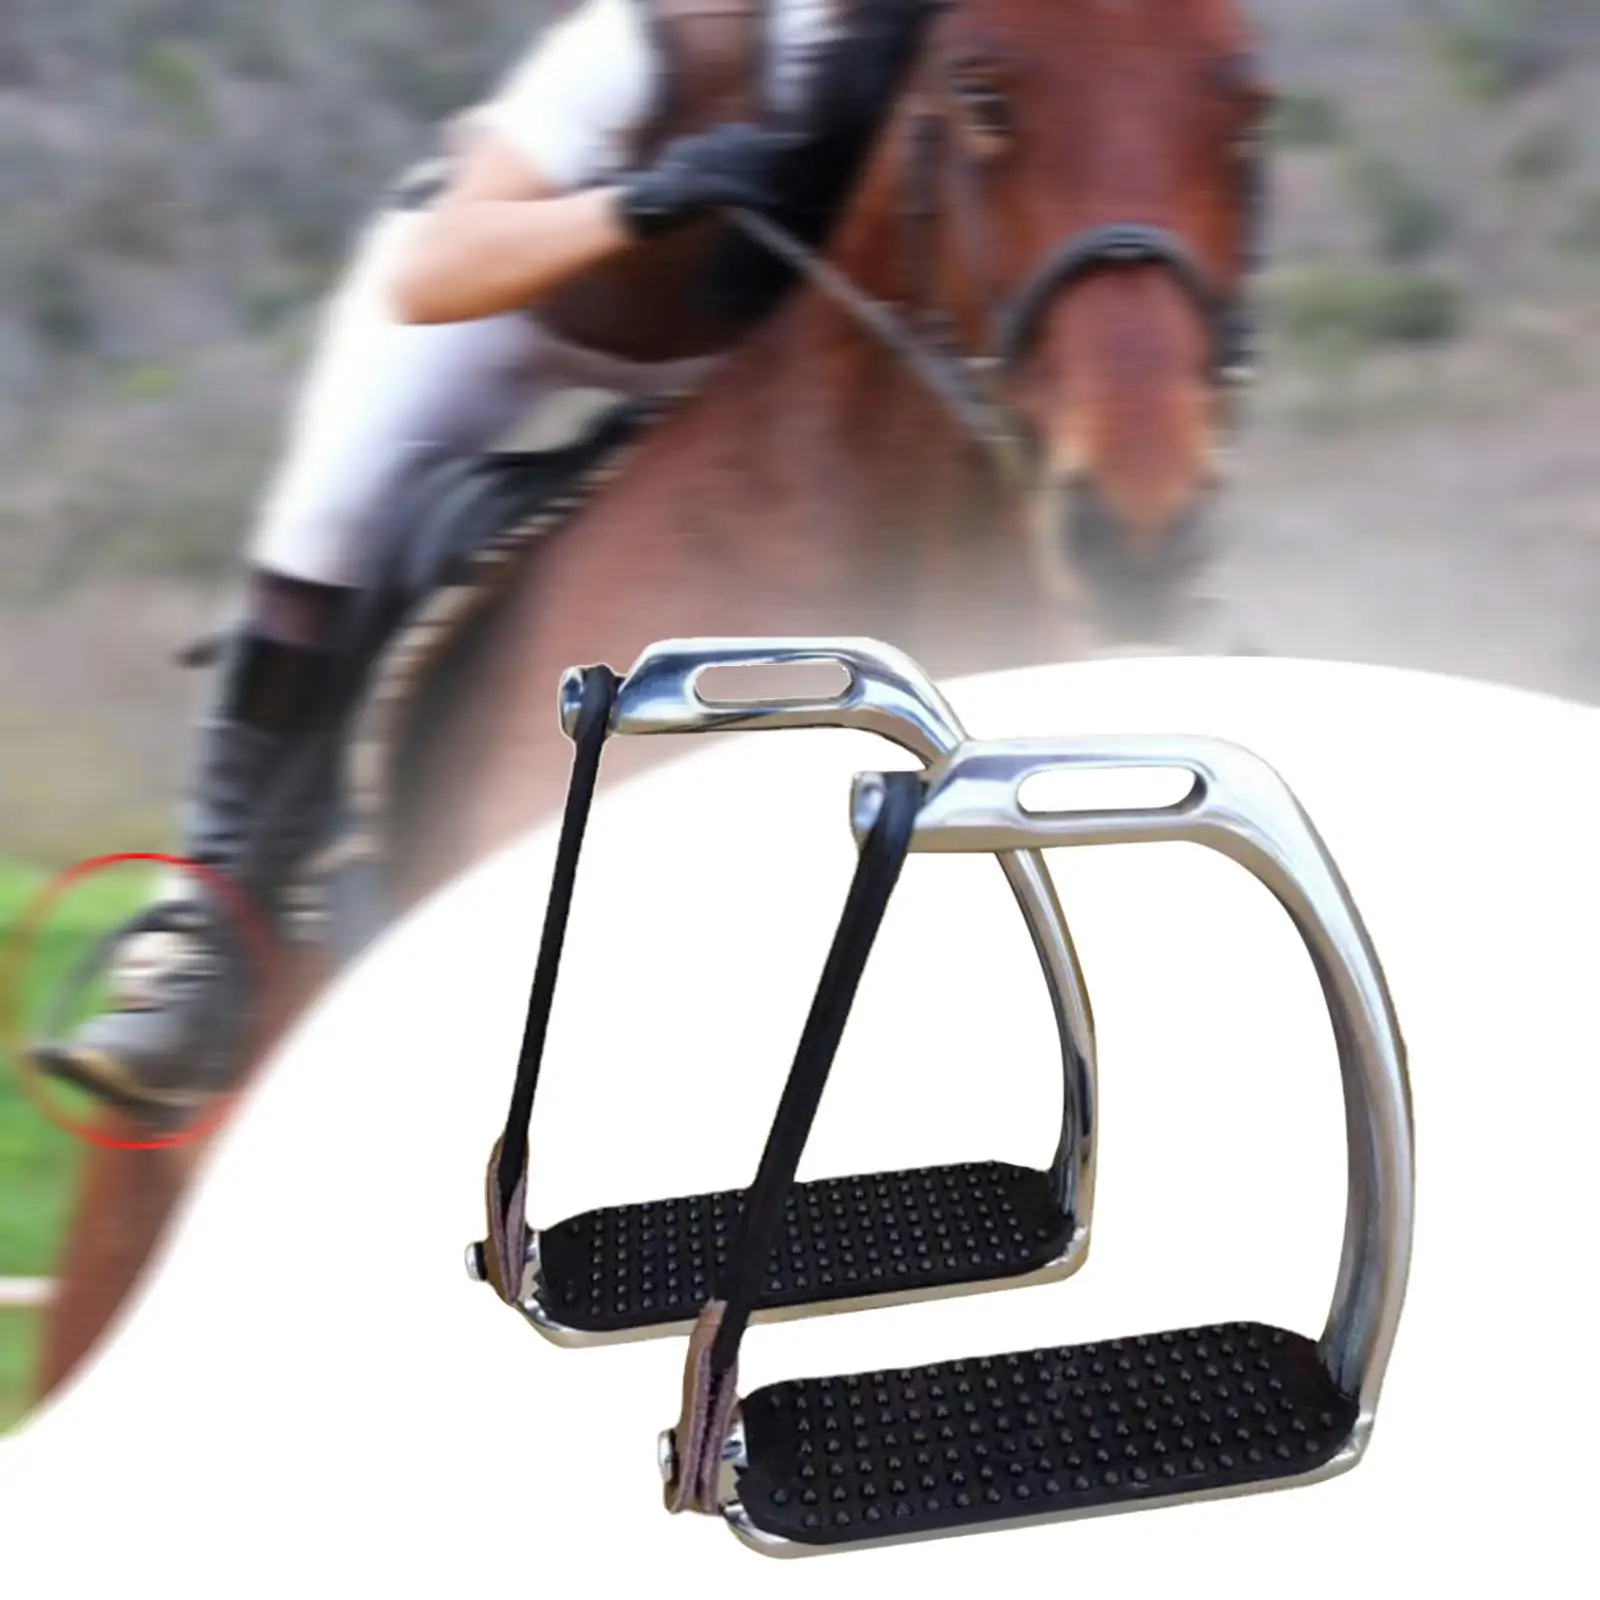 2Pieces Training Tool Horse Pedal Horse Riding Stirrups English Riding Hose Saddle for Western Riding Racing Men and Women Kids